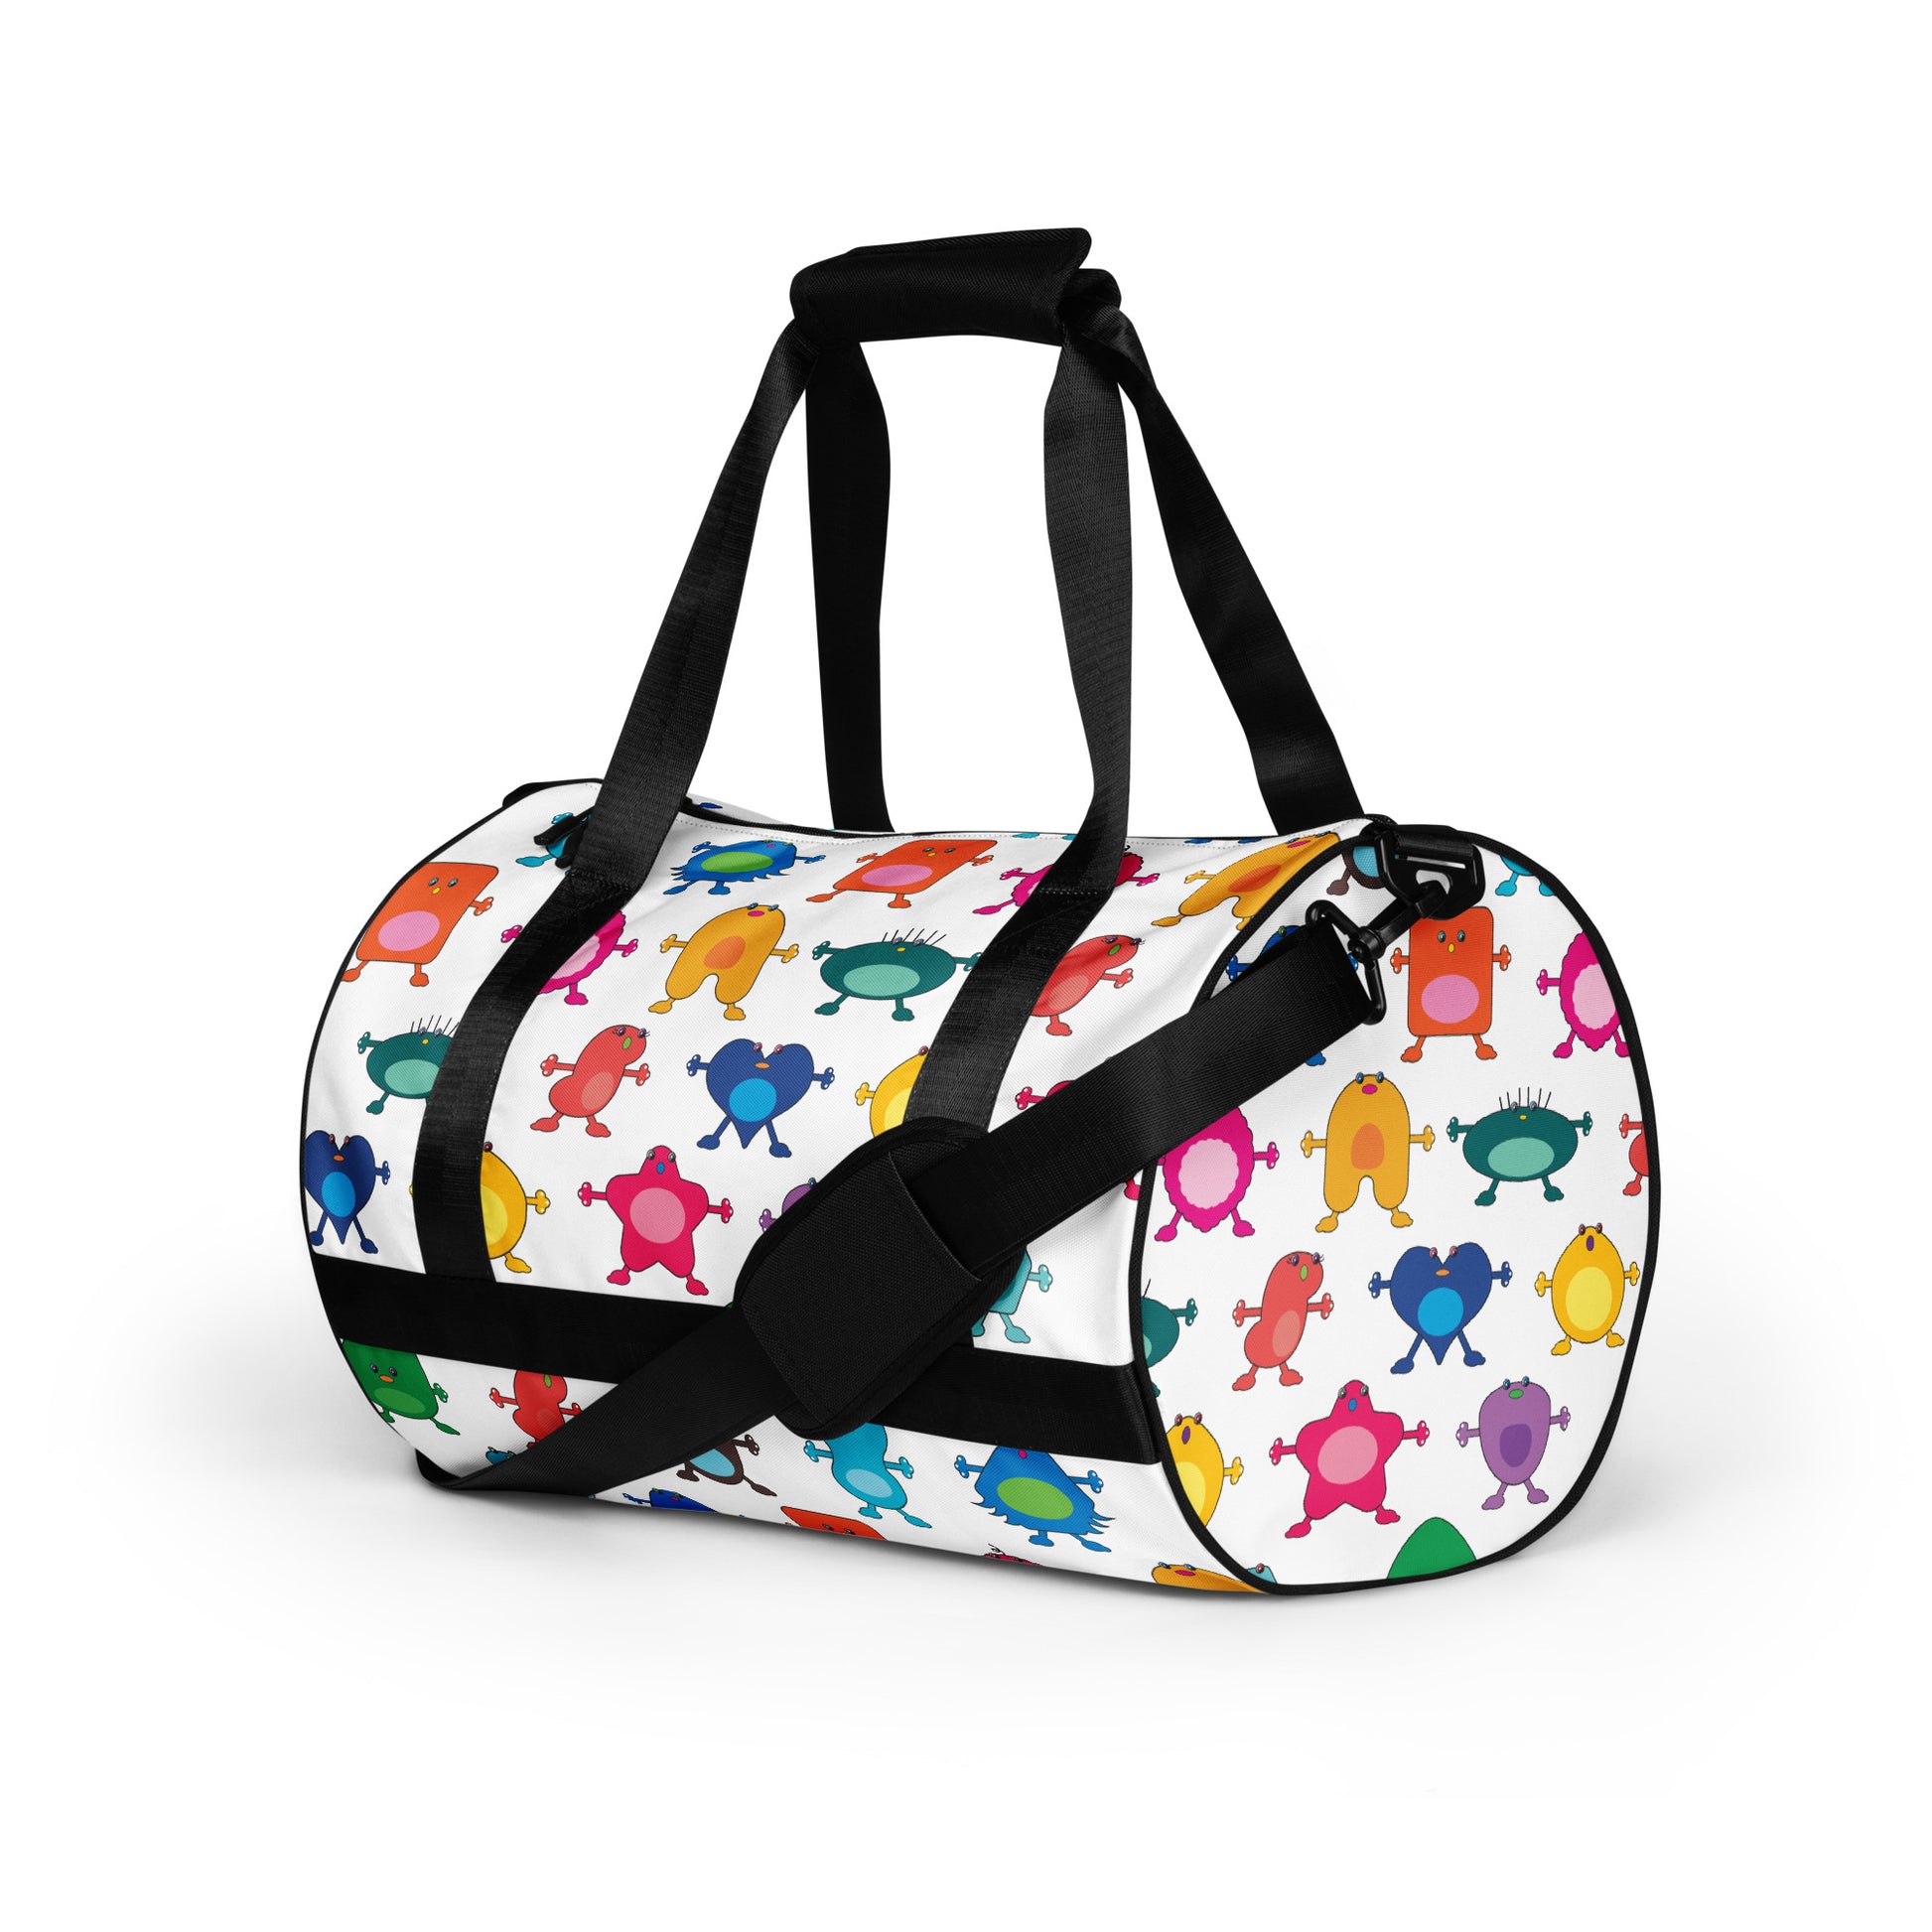 Kids cute colourful monster graphic print on white gym bag black handles end view